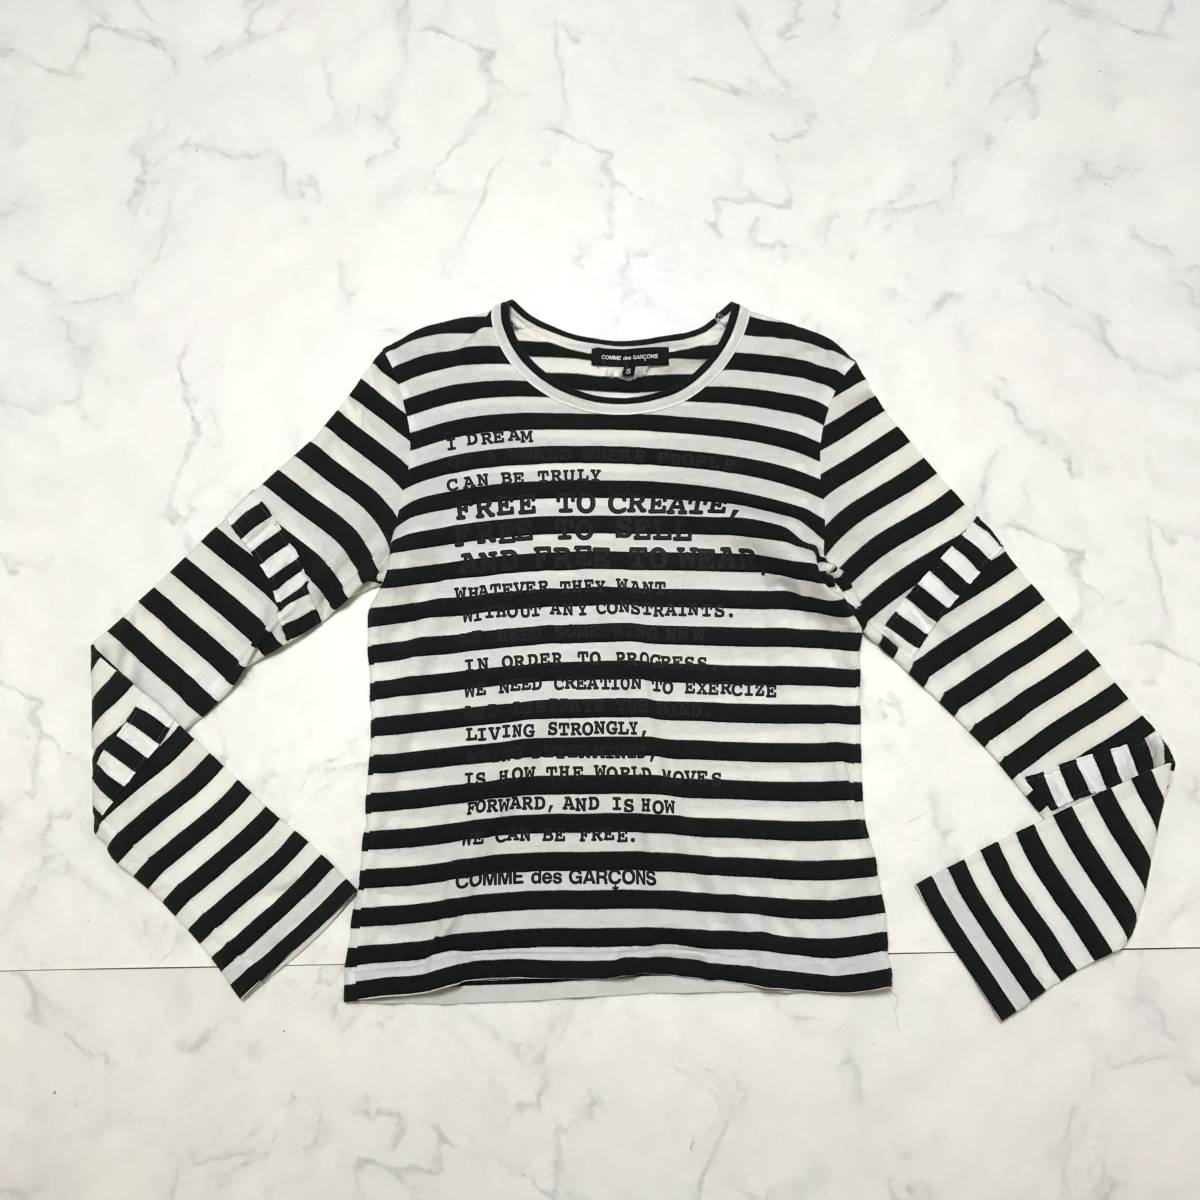 ★COMME des GARCONS コムデギャルソン★ボーダー柄 英字プリント モノトーン ボンデージ風 長袖 Tシャツ カットソー ロンT size S_画像4